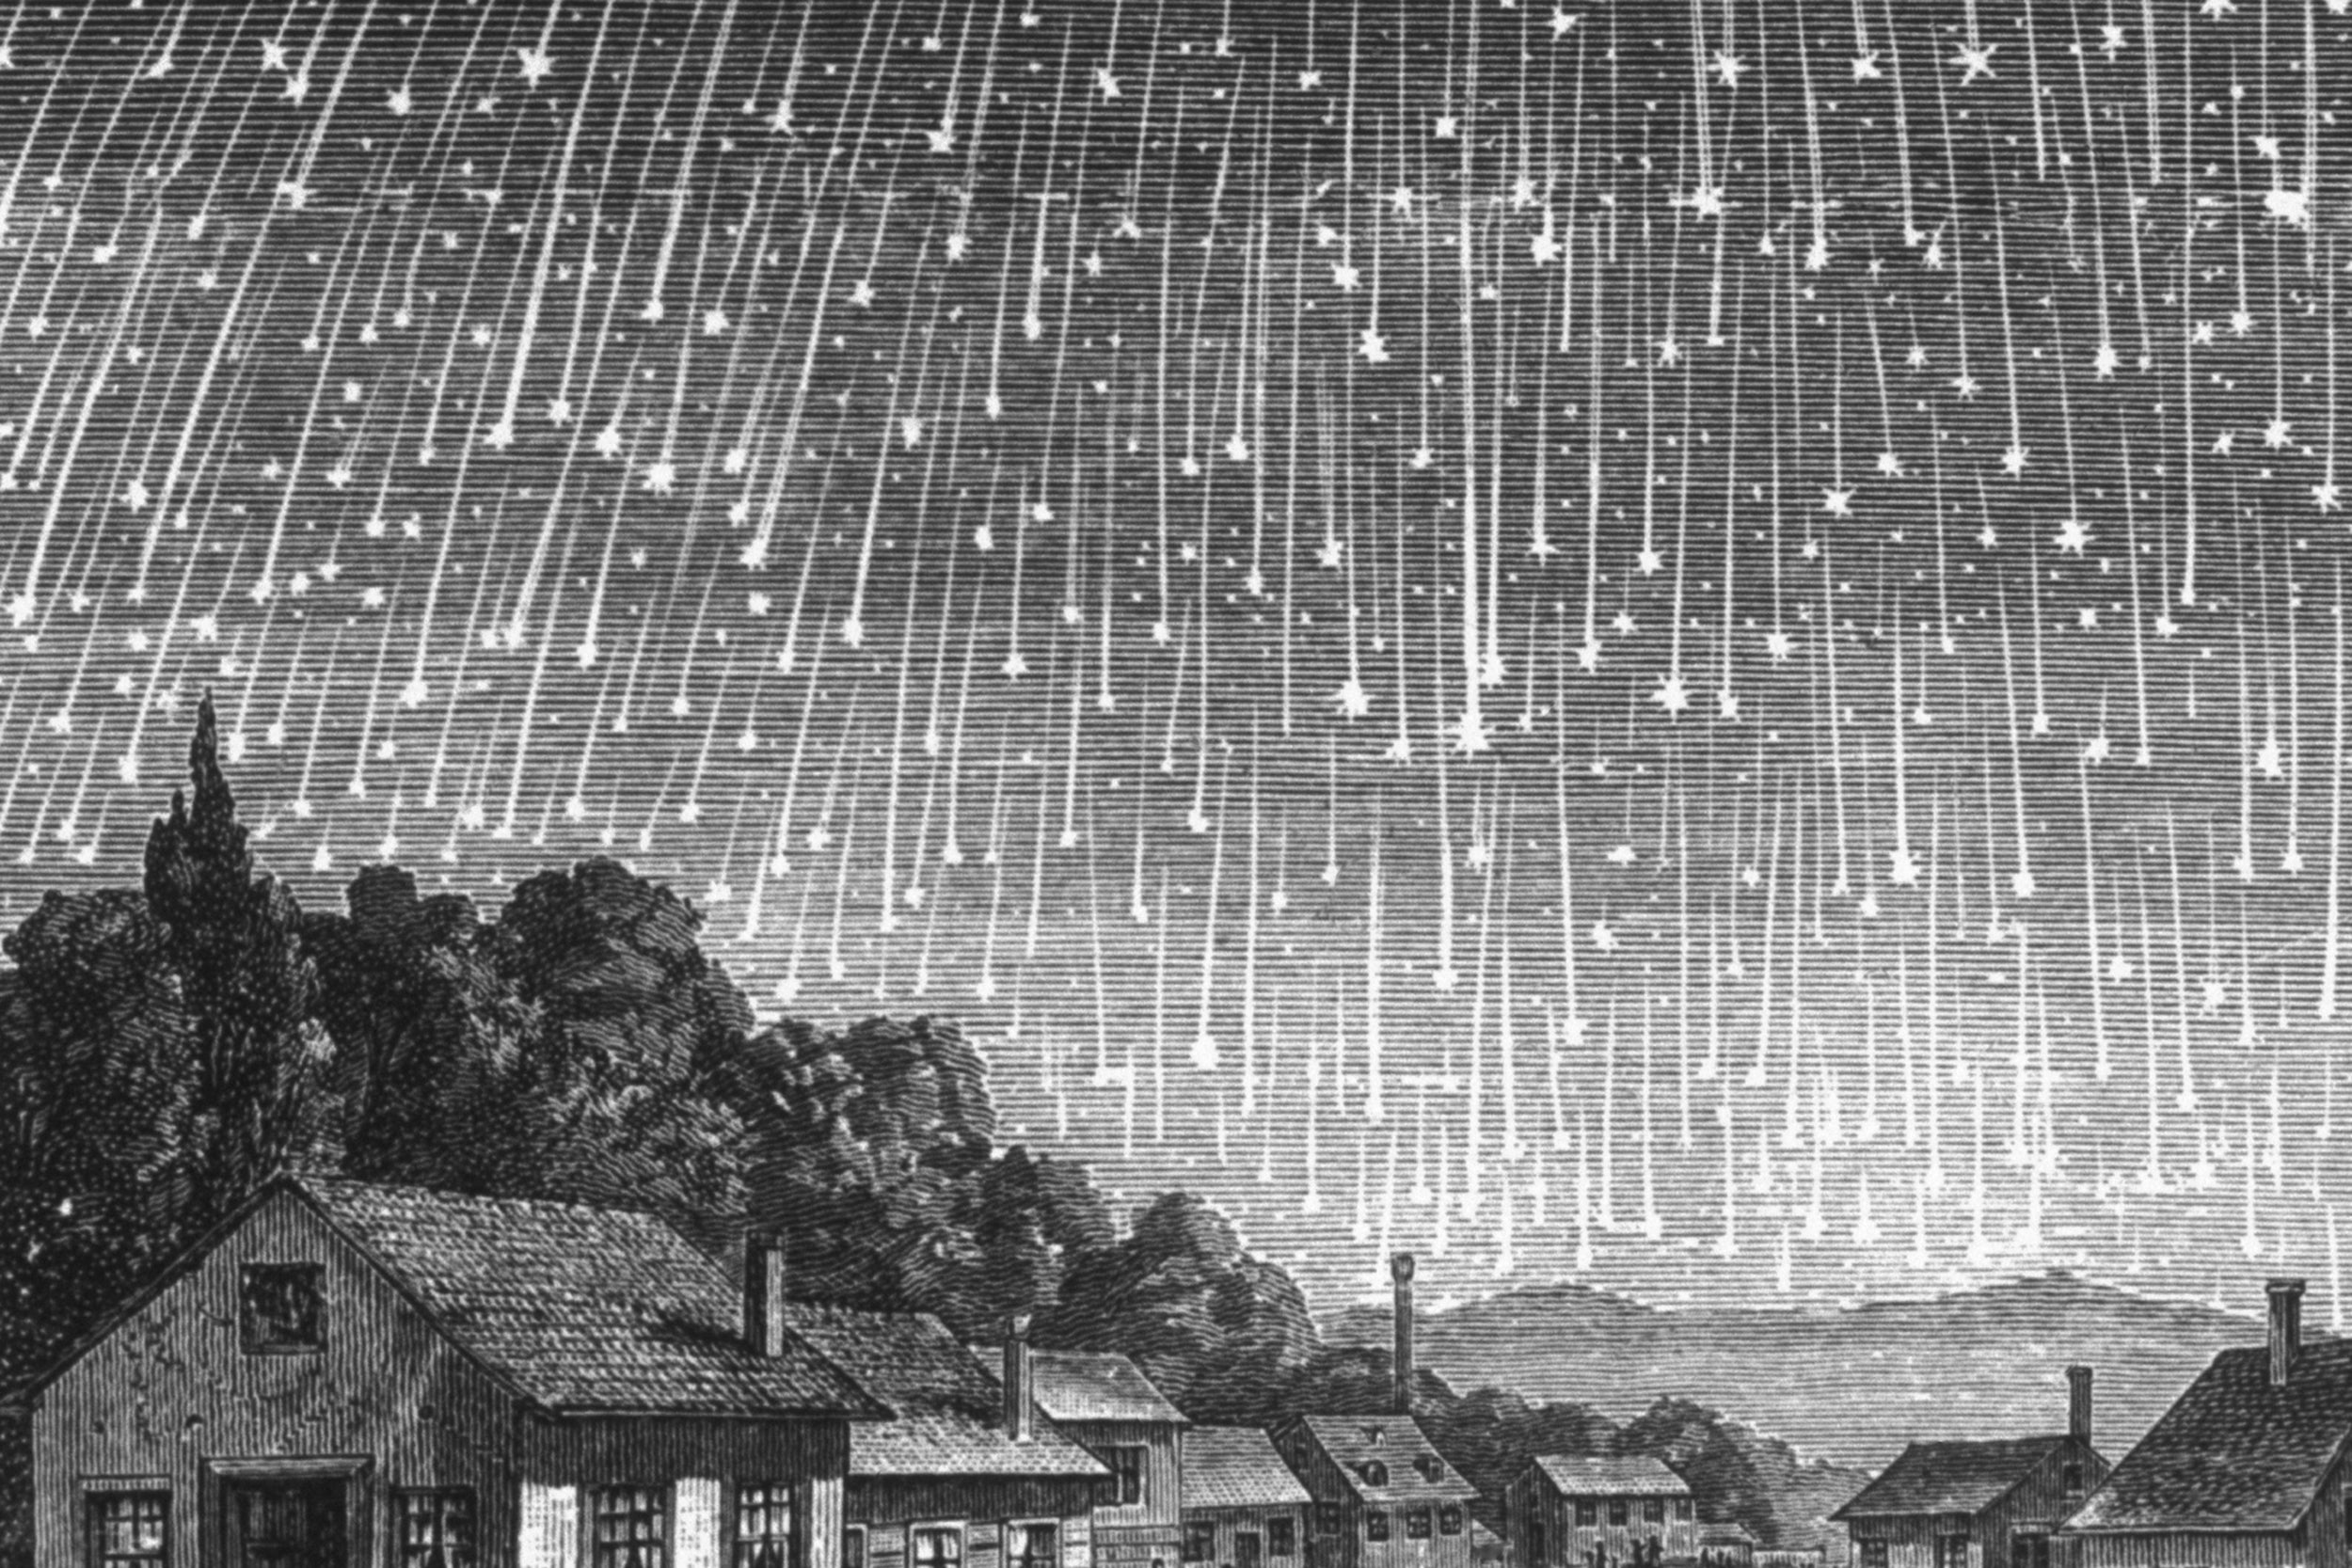 Drawing of Leonid meteor shower, 1833.